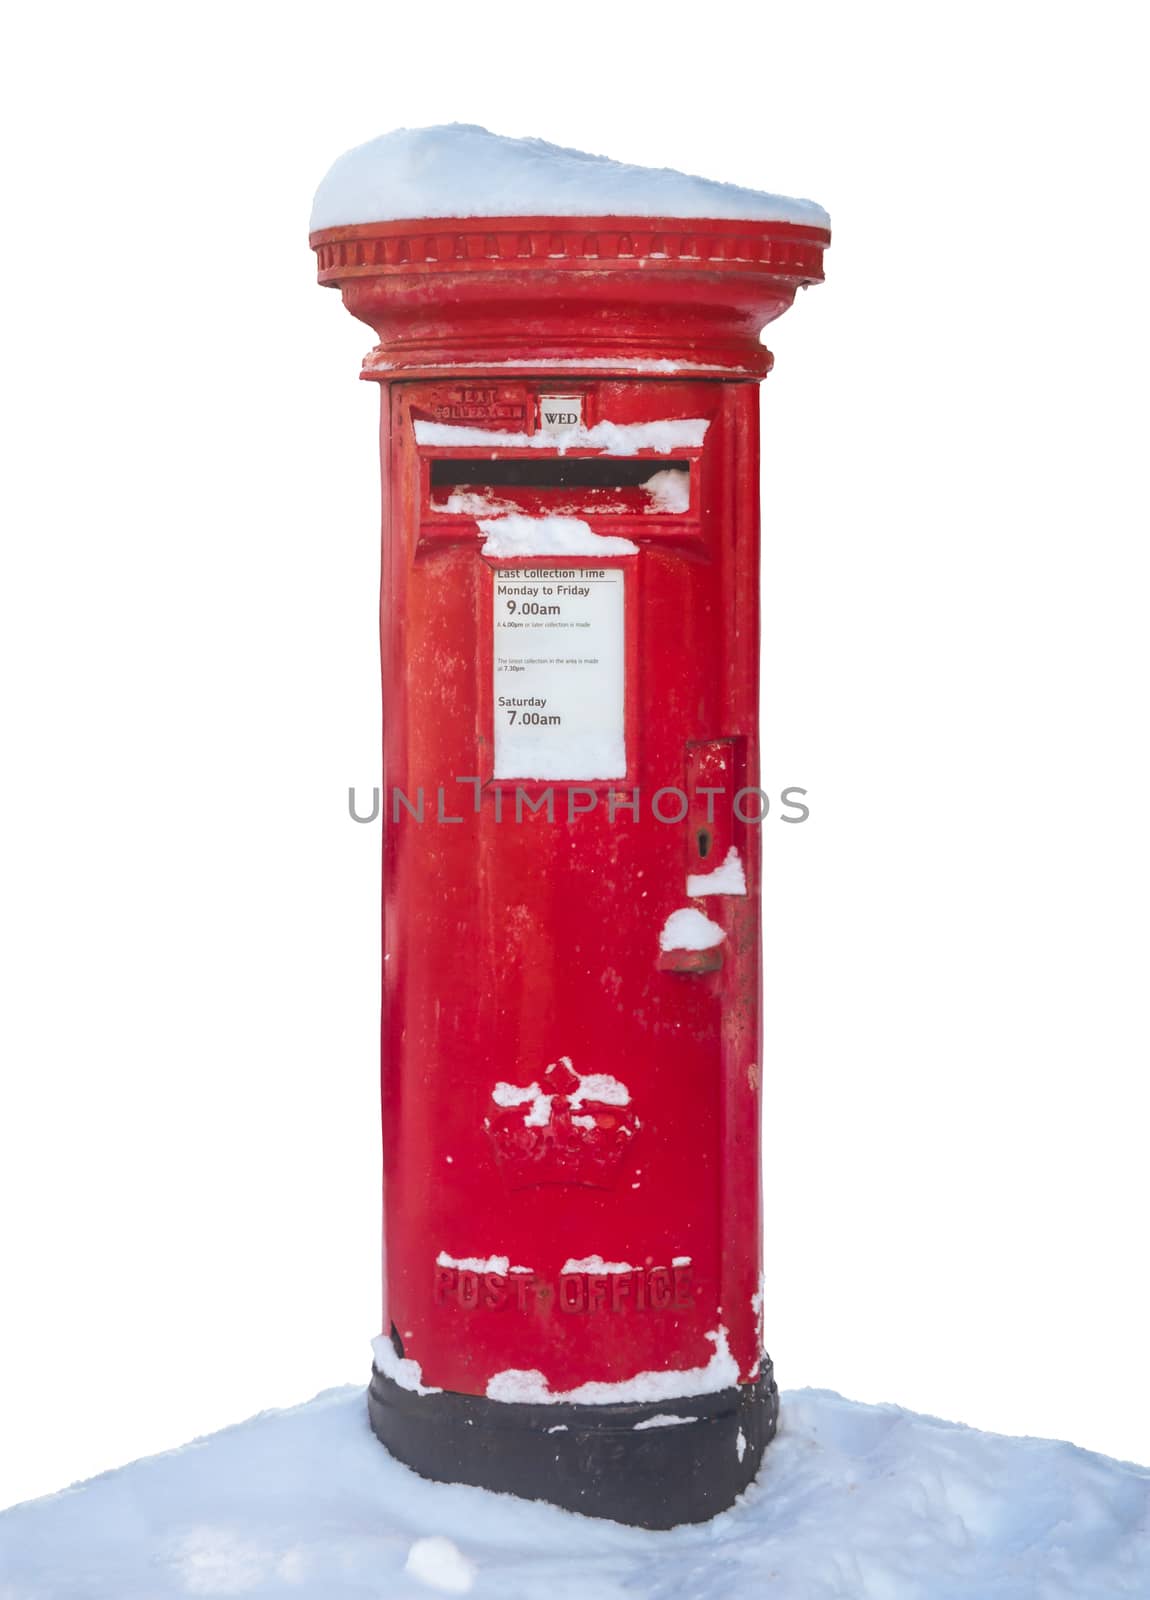 Isolated Traditional Red British Royal Mail Post Box In The Snow